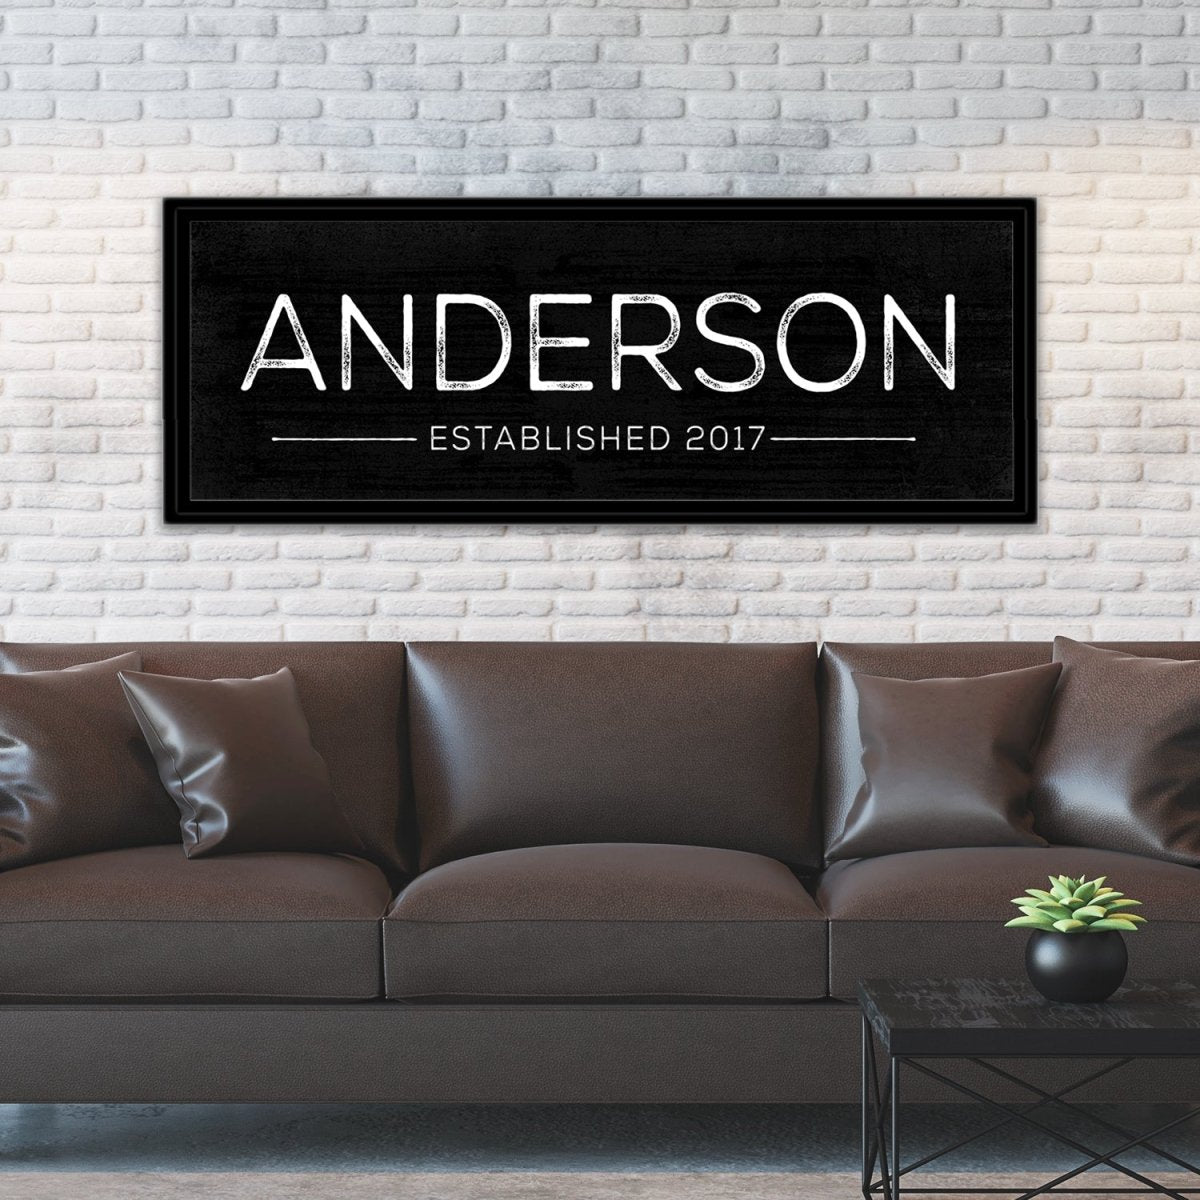 Personalized Family Name Sign With Established Date Above Couch - Pretty Perfect Studio